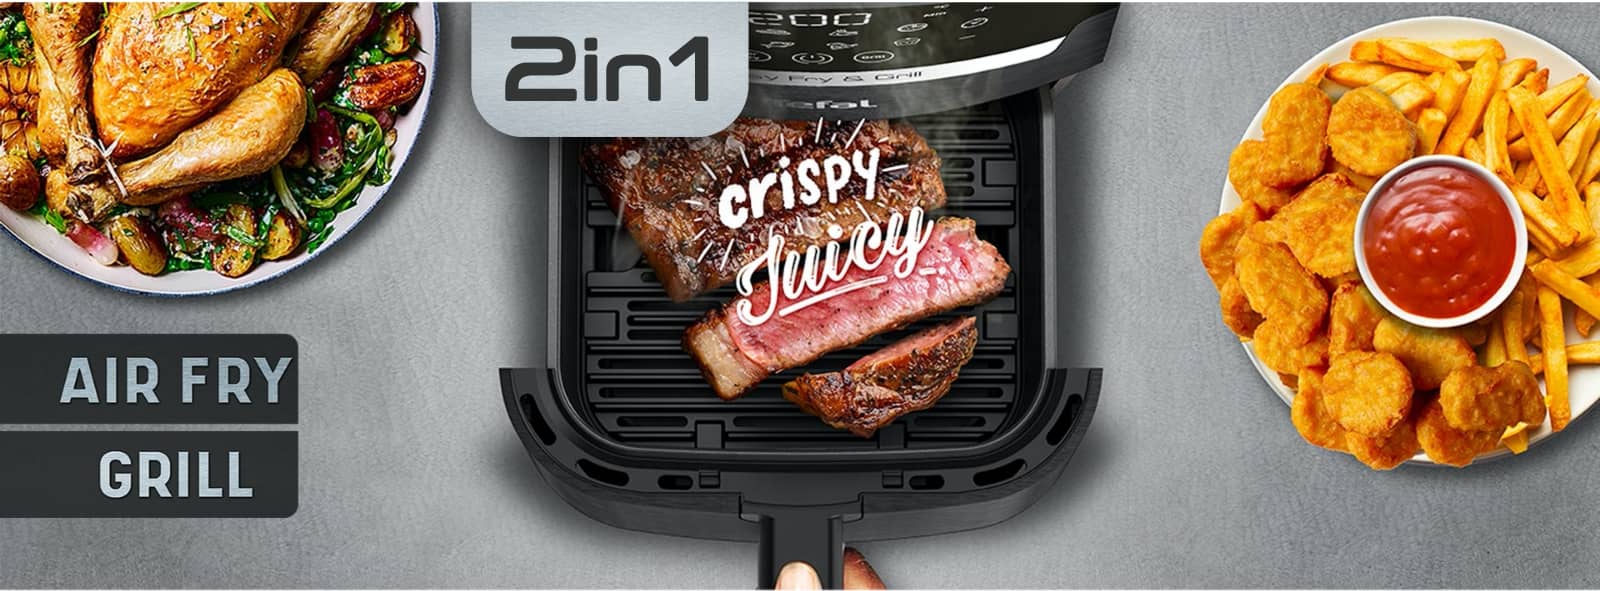 EasyFry 2in1 Air Fryer and Grill, grilling juicy medium rare steak and air fried Chips